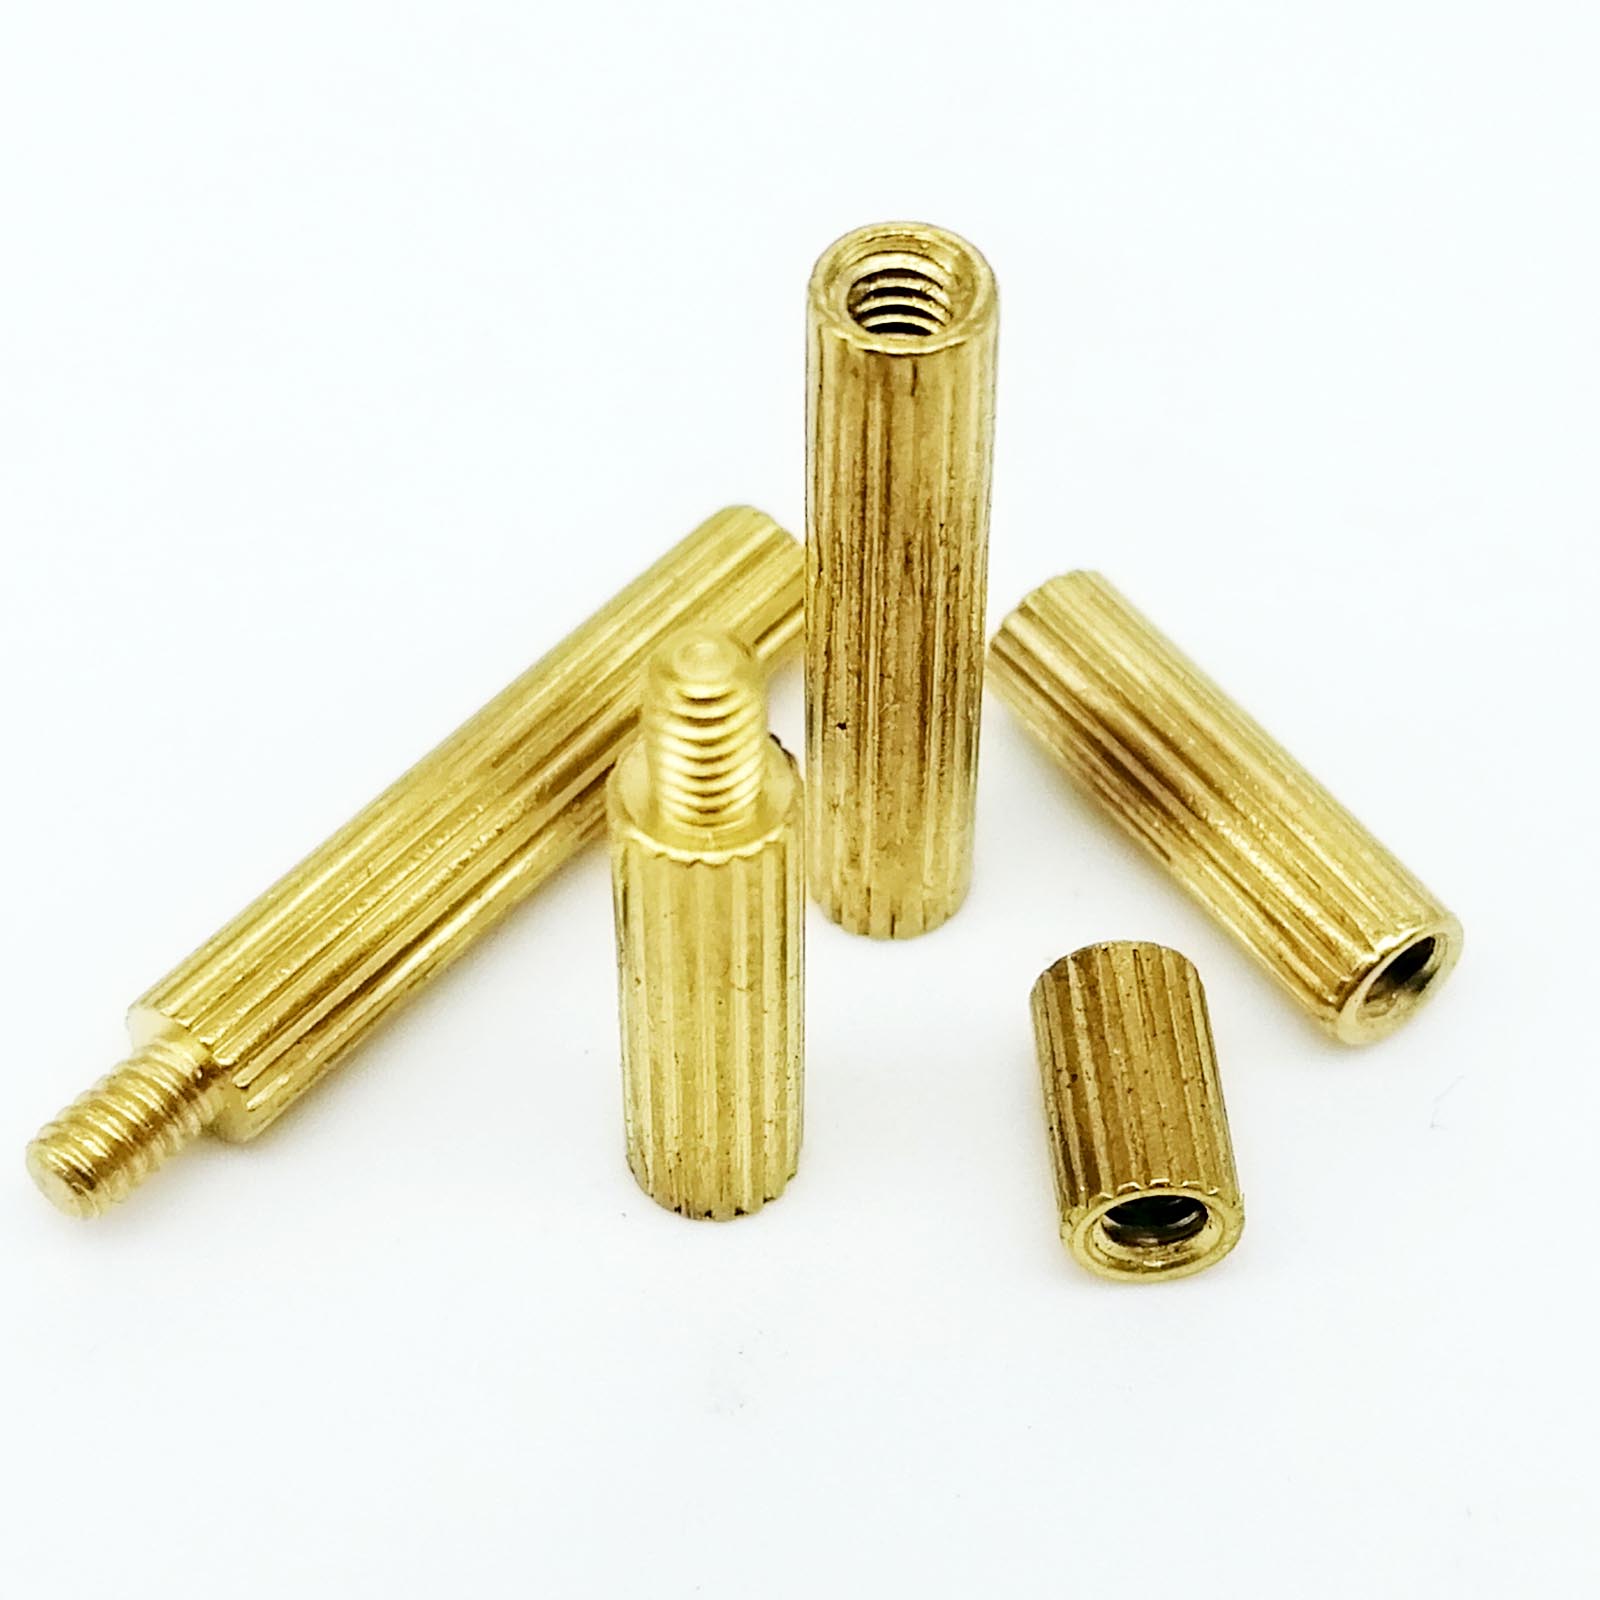 M2 Brass Threaded Hex Double Pass Spacer Copper Column Support Nut For PCB Board